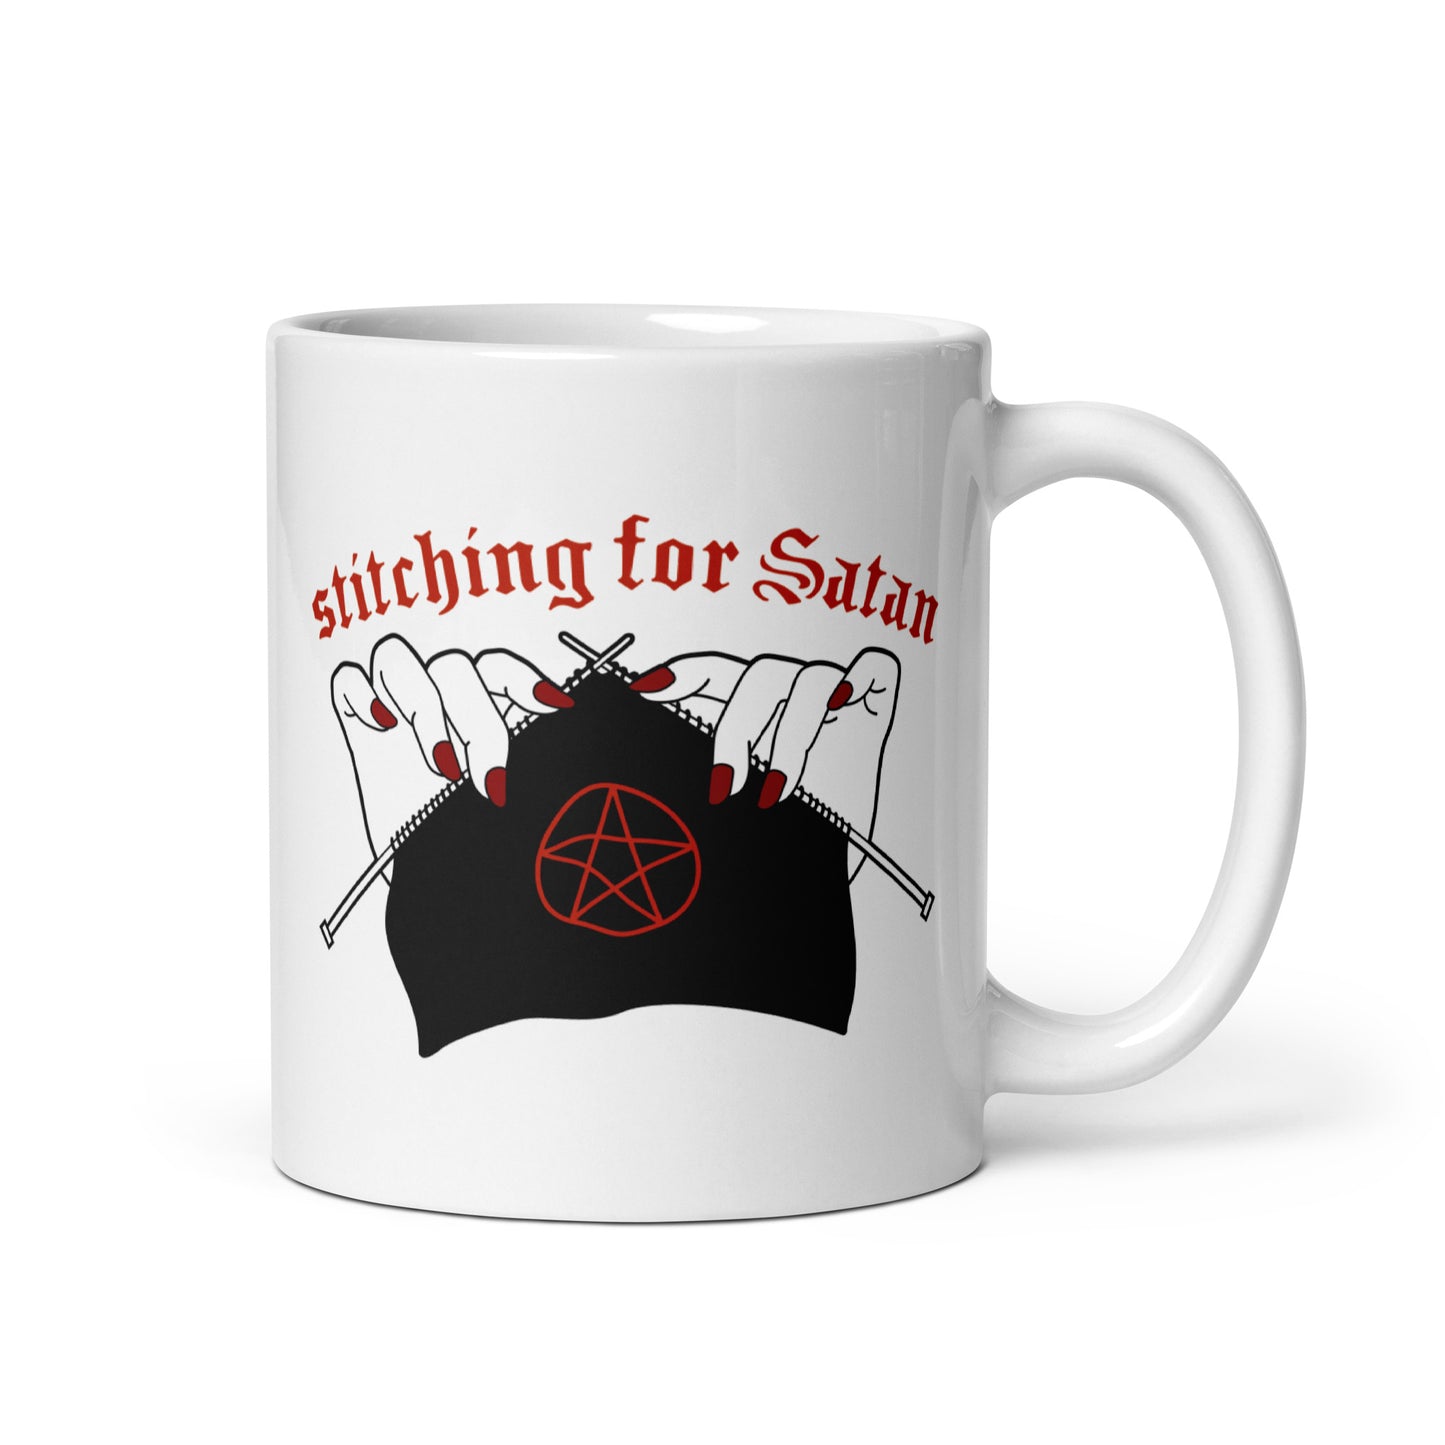 A white 11oz ceramic coffee mug featuring an illustration of pale white hands with red fingernails holding knitting needles. Fabric on the needles features a red pentagram. Text above the hands reads "stitching for Satan" in a gothc red font.